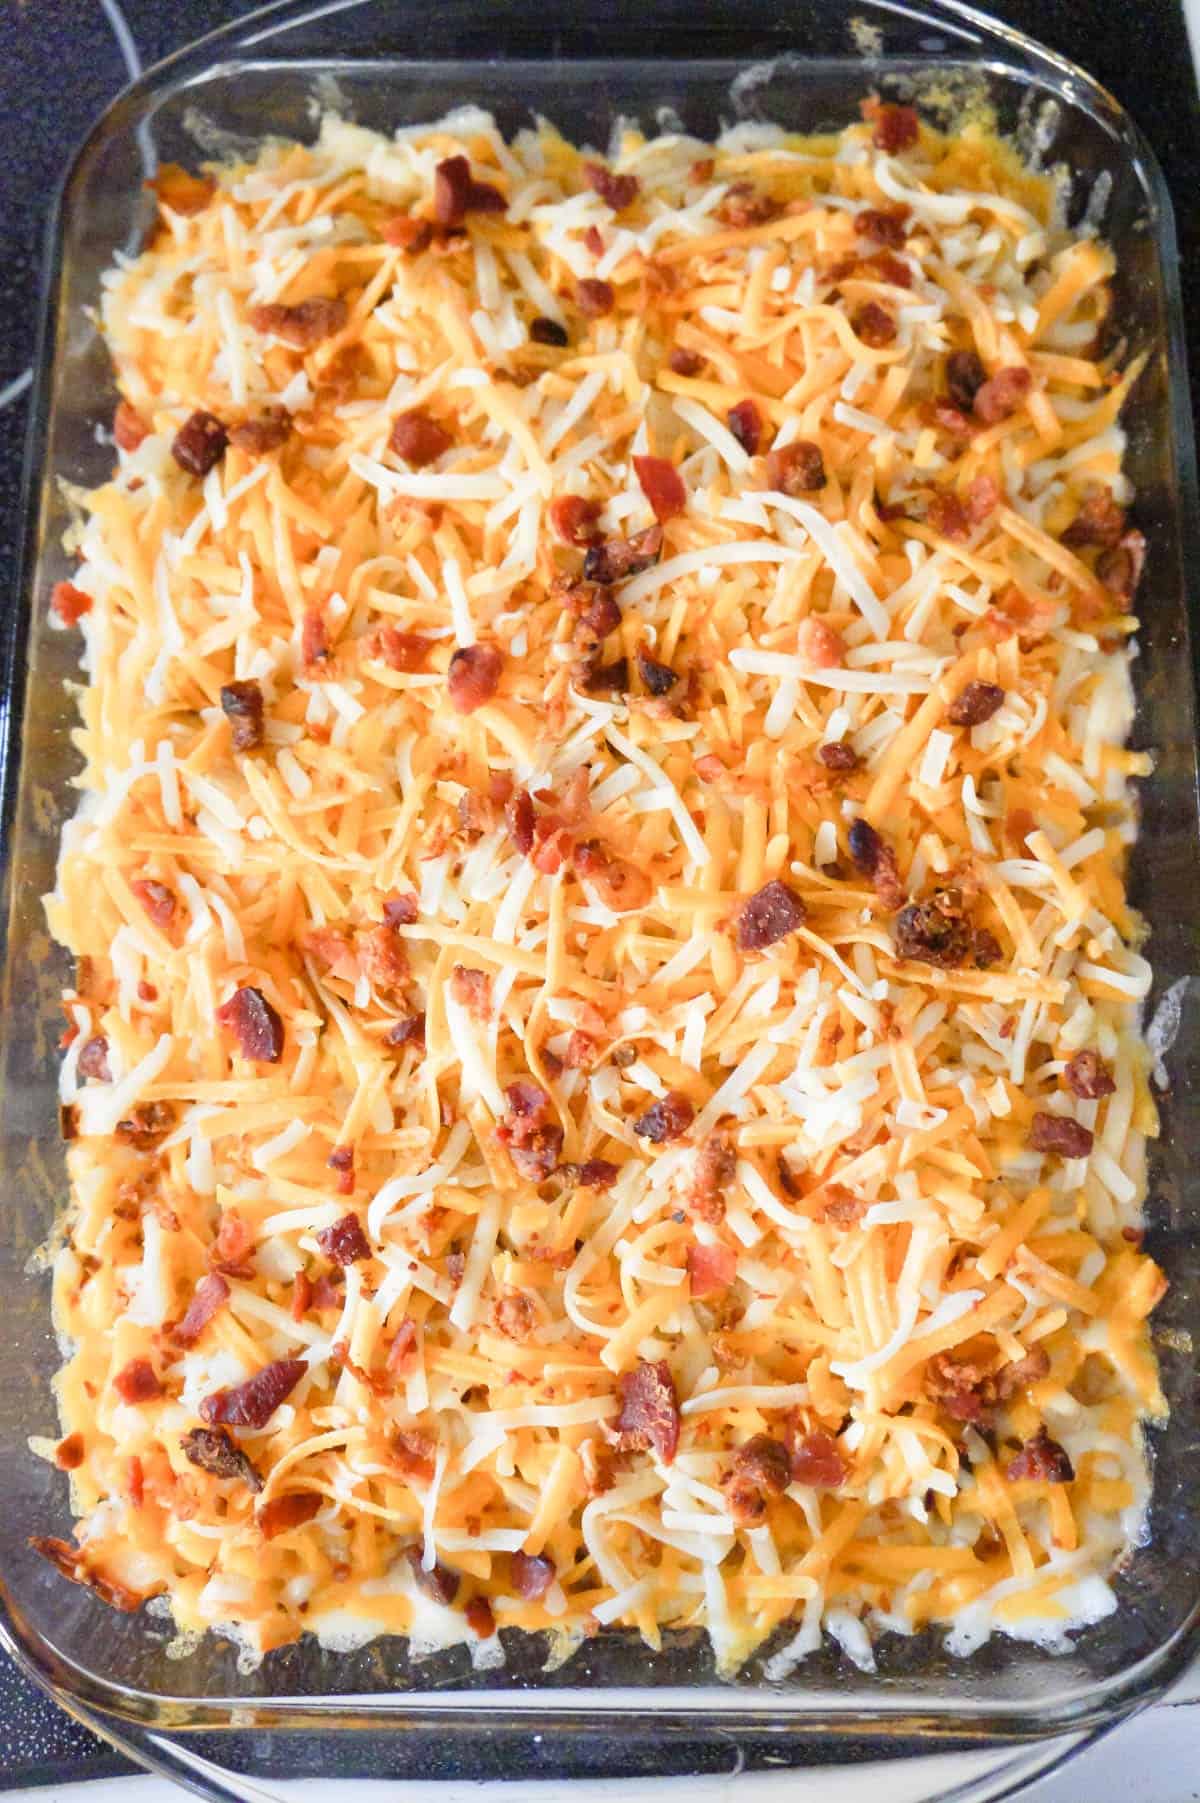 shredded cheddar cheese and crumbled bacon on top of hash brown casserole